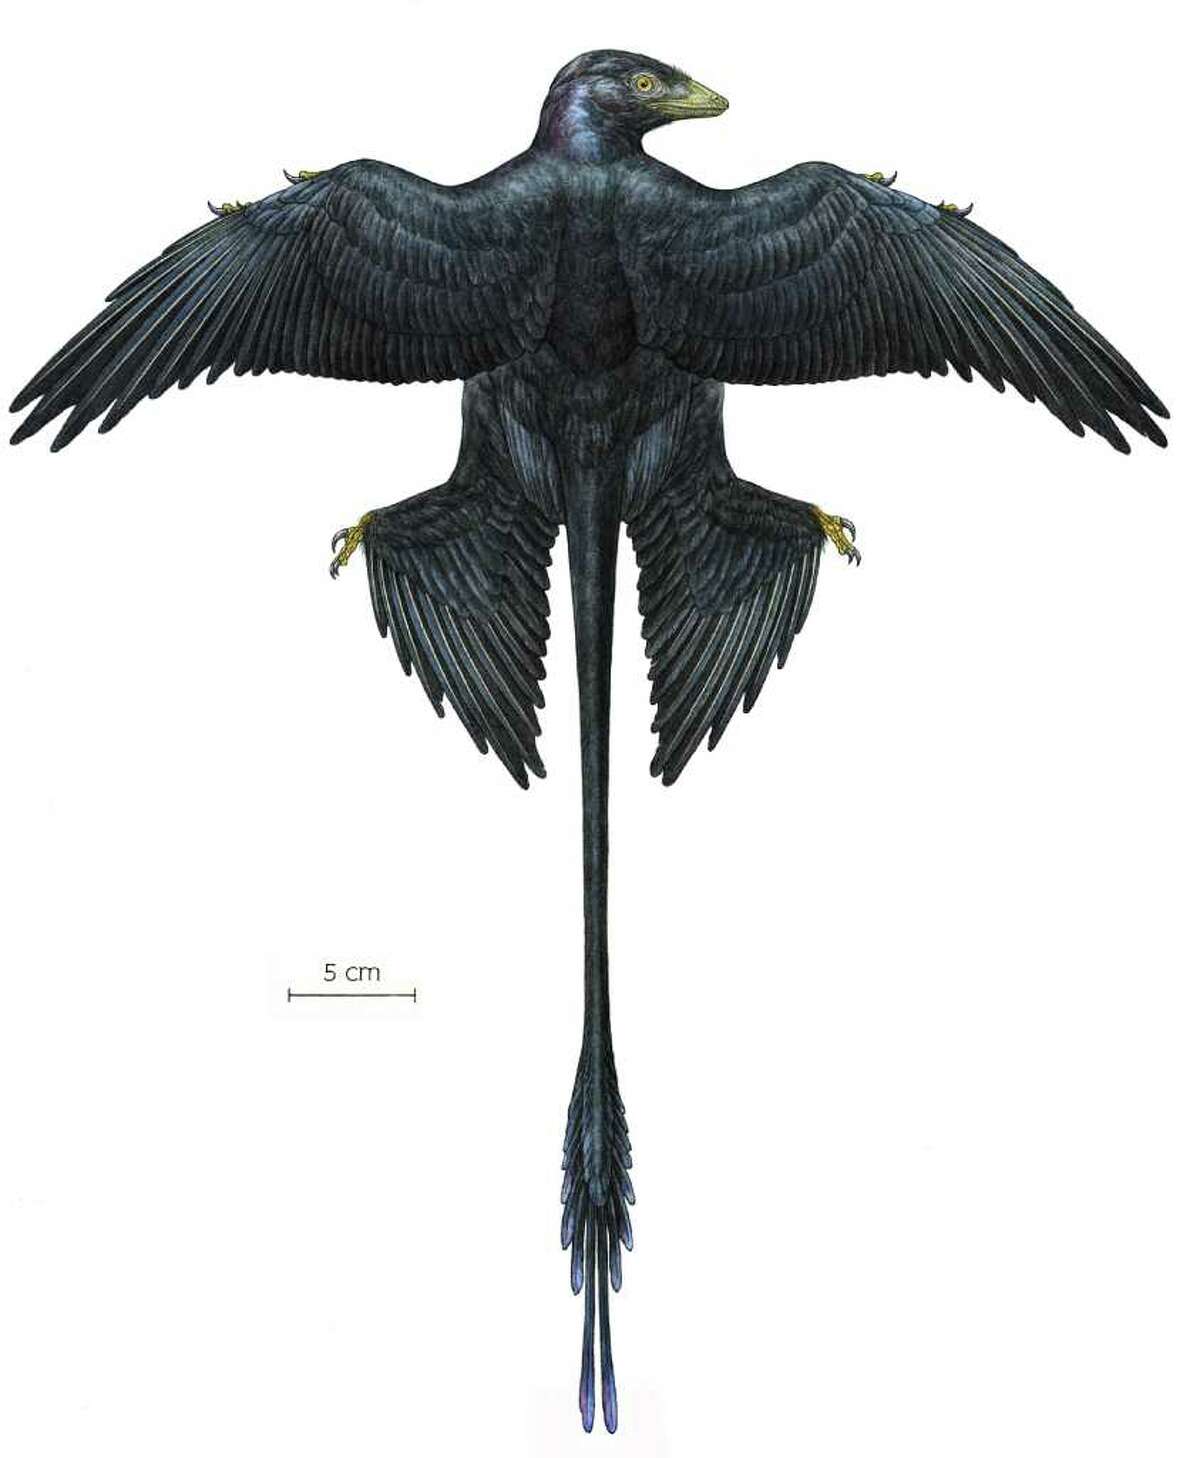 The microraptor was a four-winged dinosaur that lived some 130 million years ago in what’s now the northeastern part of China.